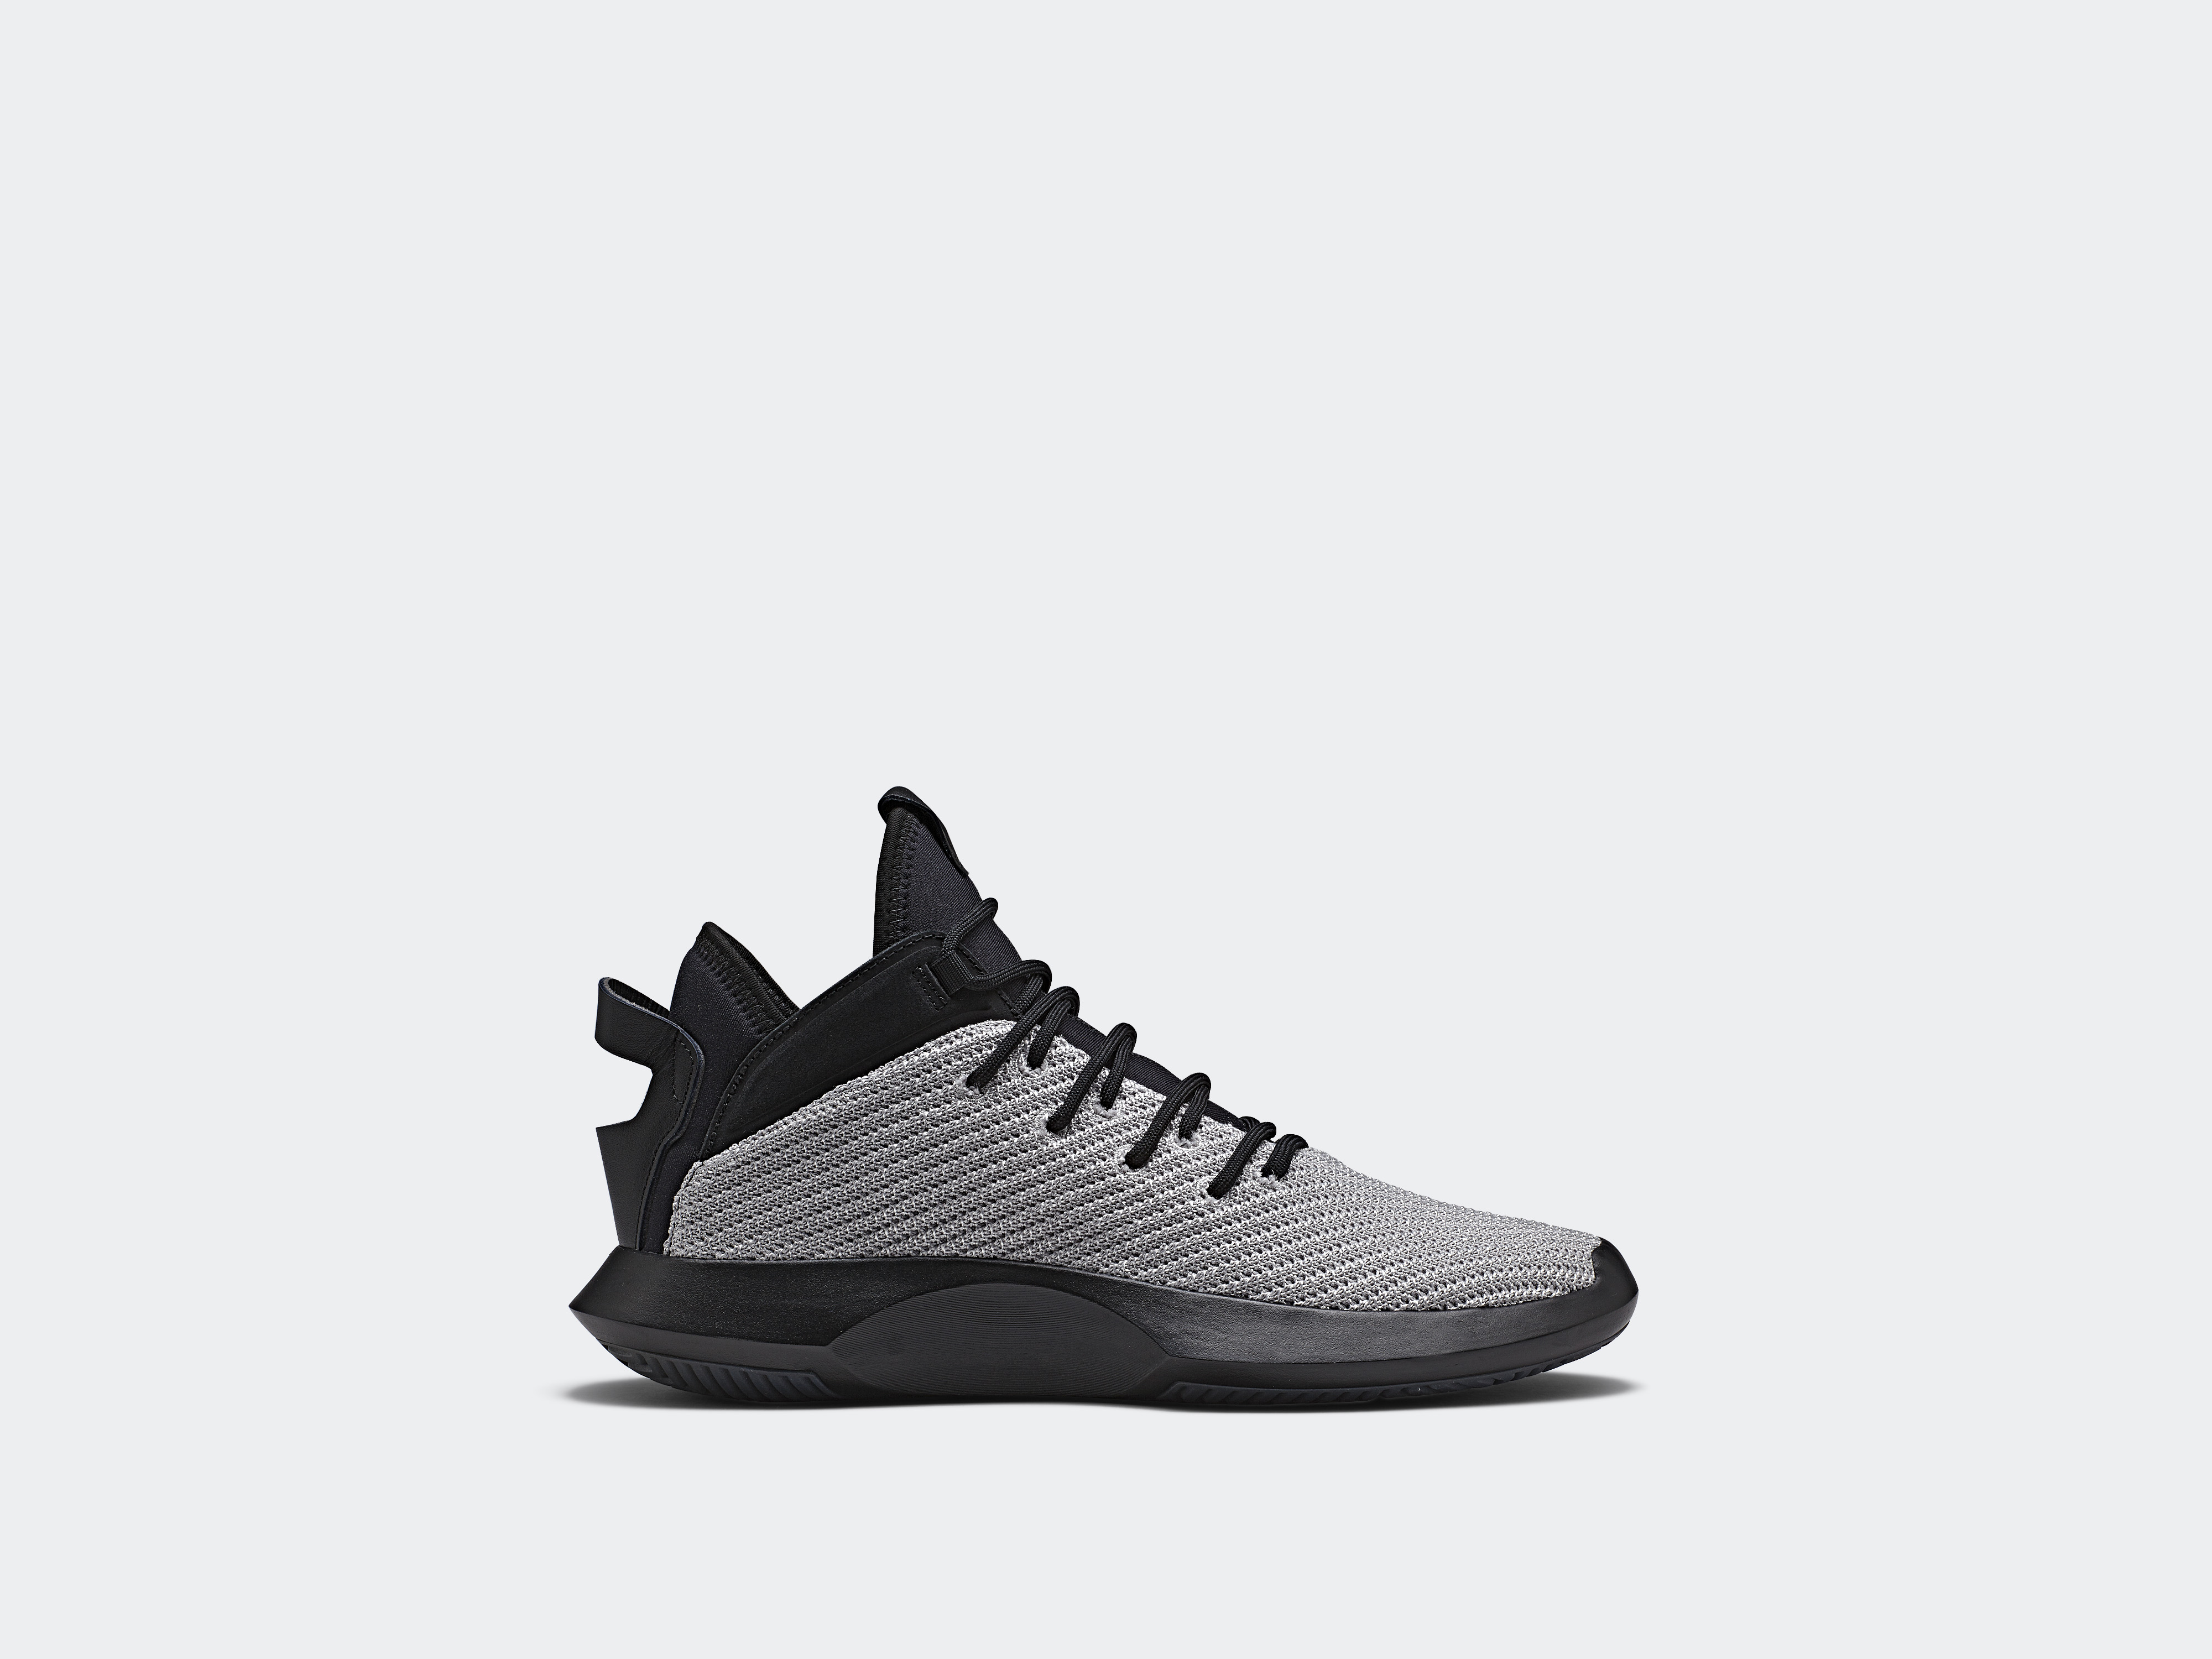 adidas Crazy 1 ADV "Chainmail" Pack